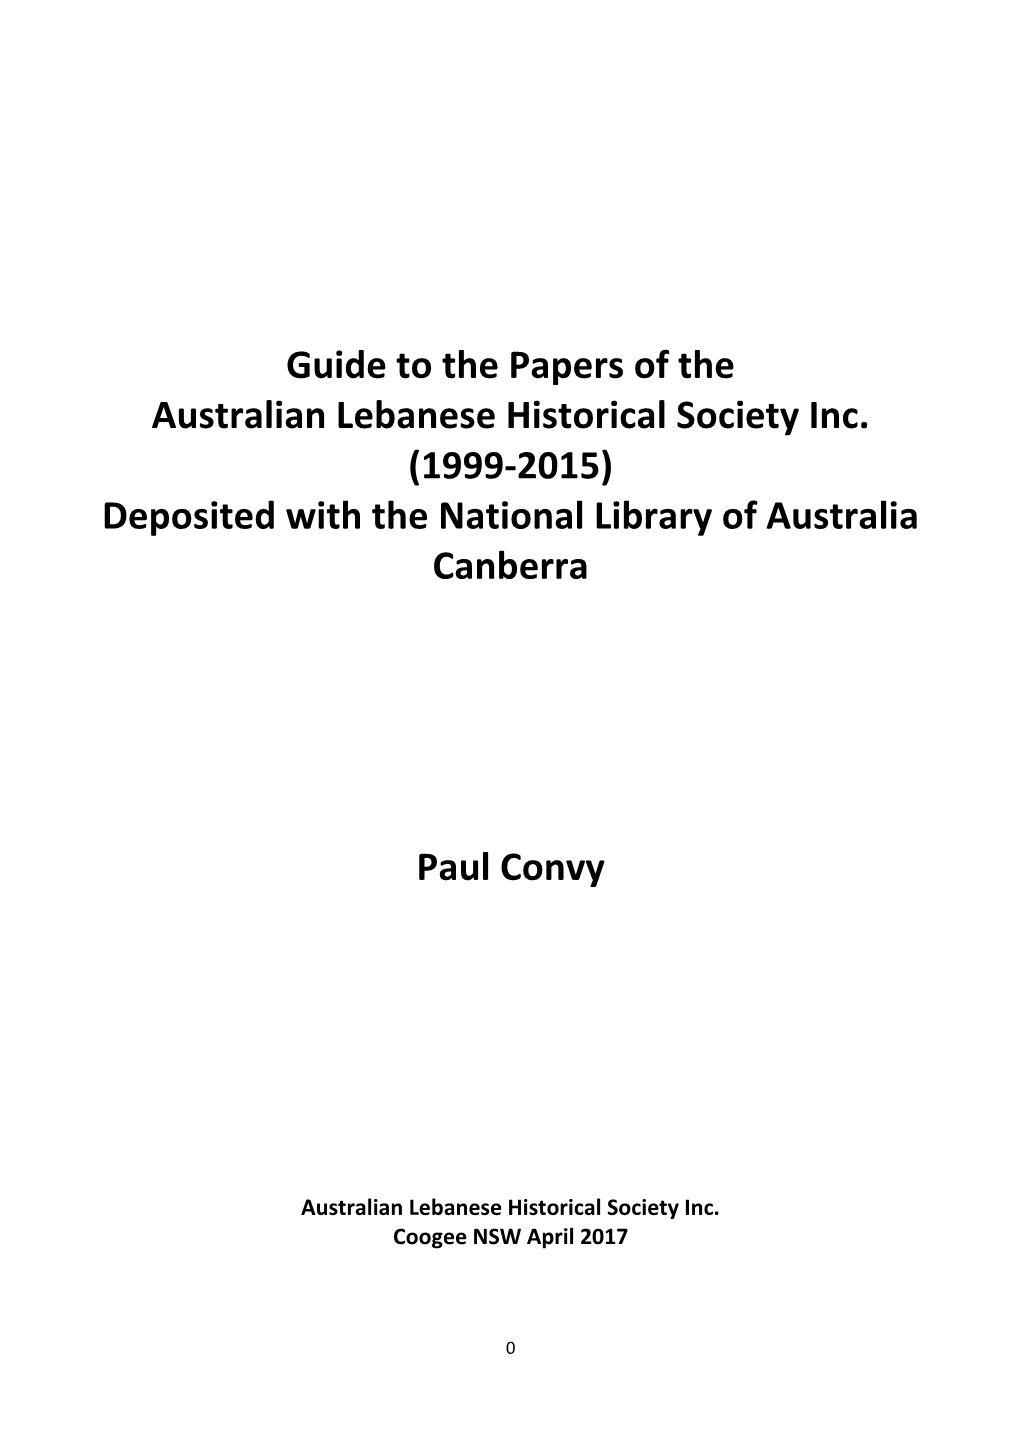 Papers of the Australian Lebanese Historical Society at the National